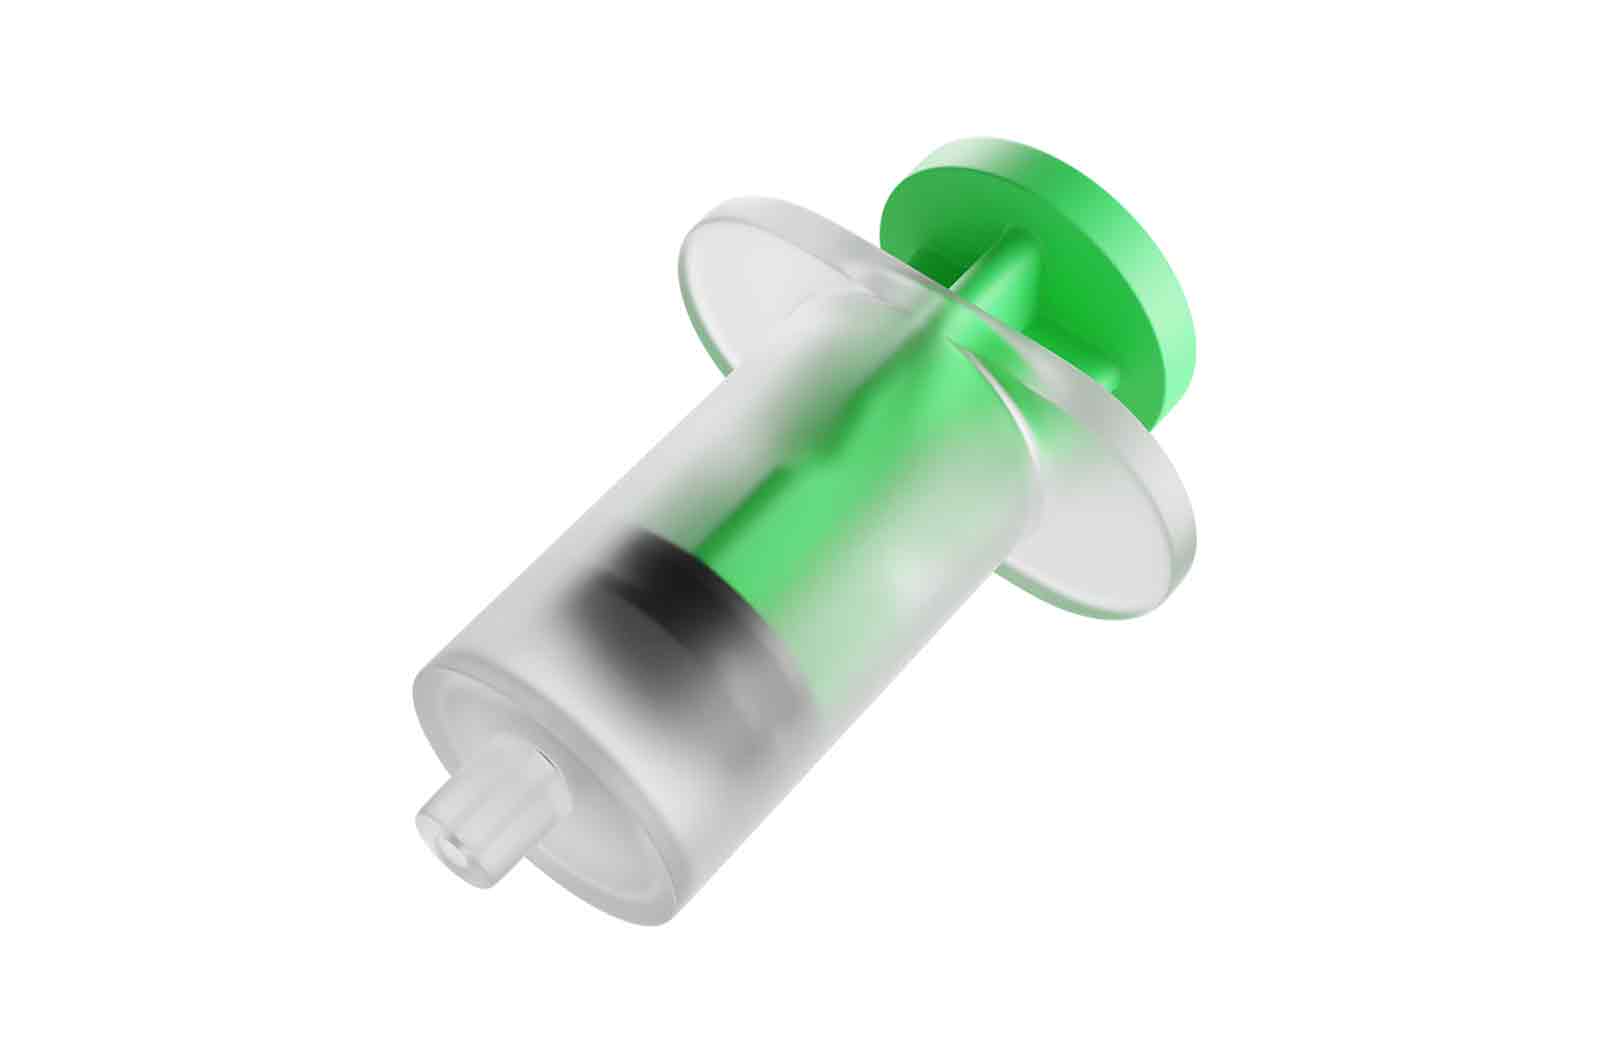 Plastic syringe with green plunger, 3d rendered illustration. Medical device for injecting or drawing fluids.